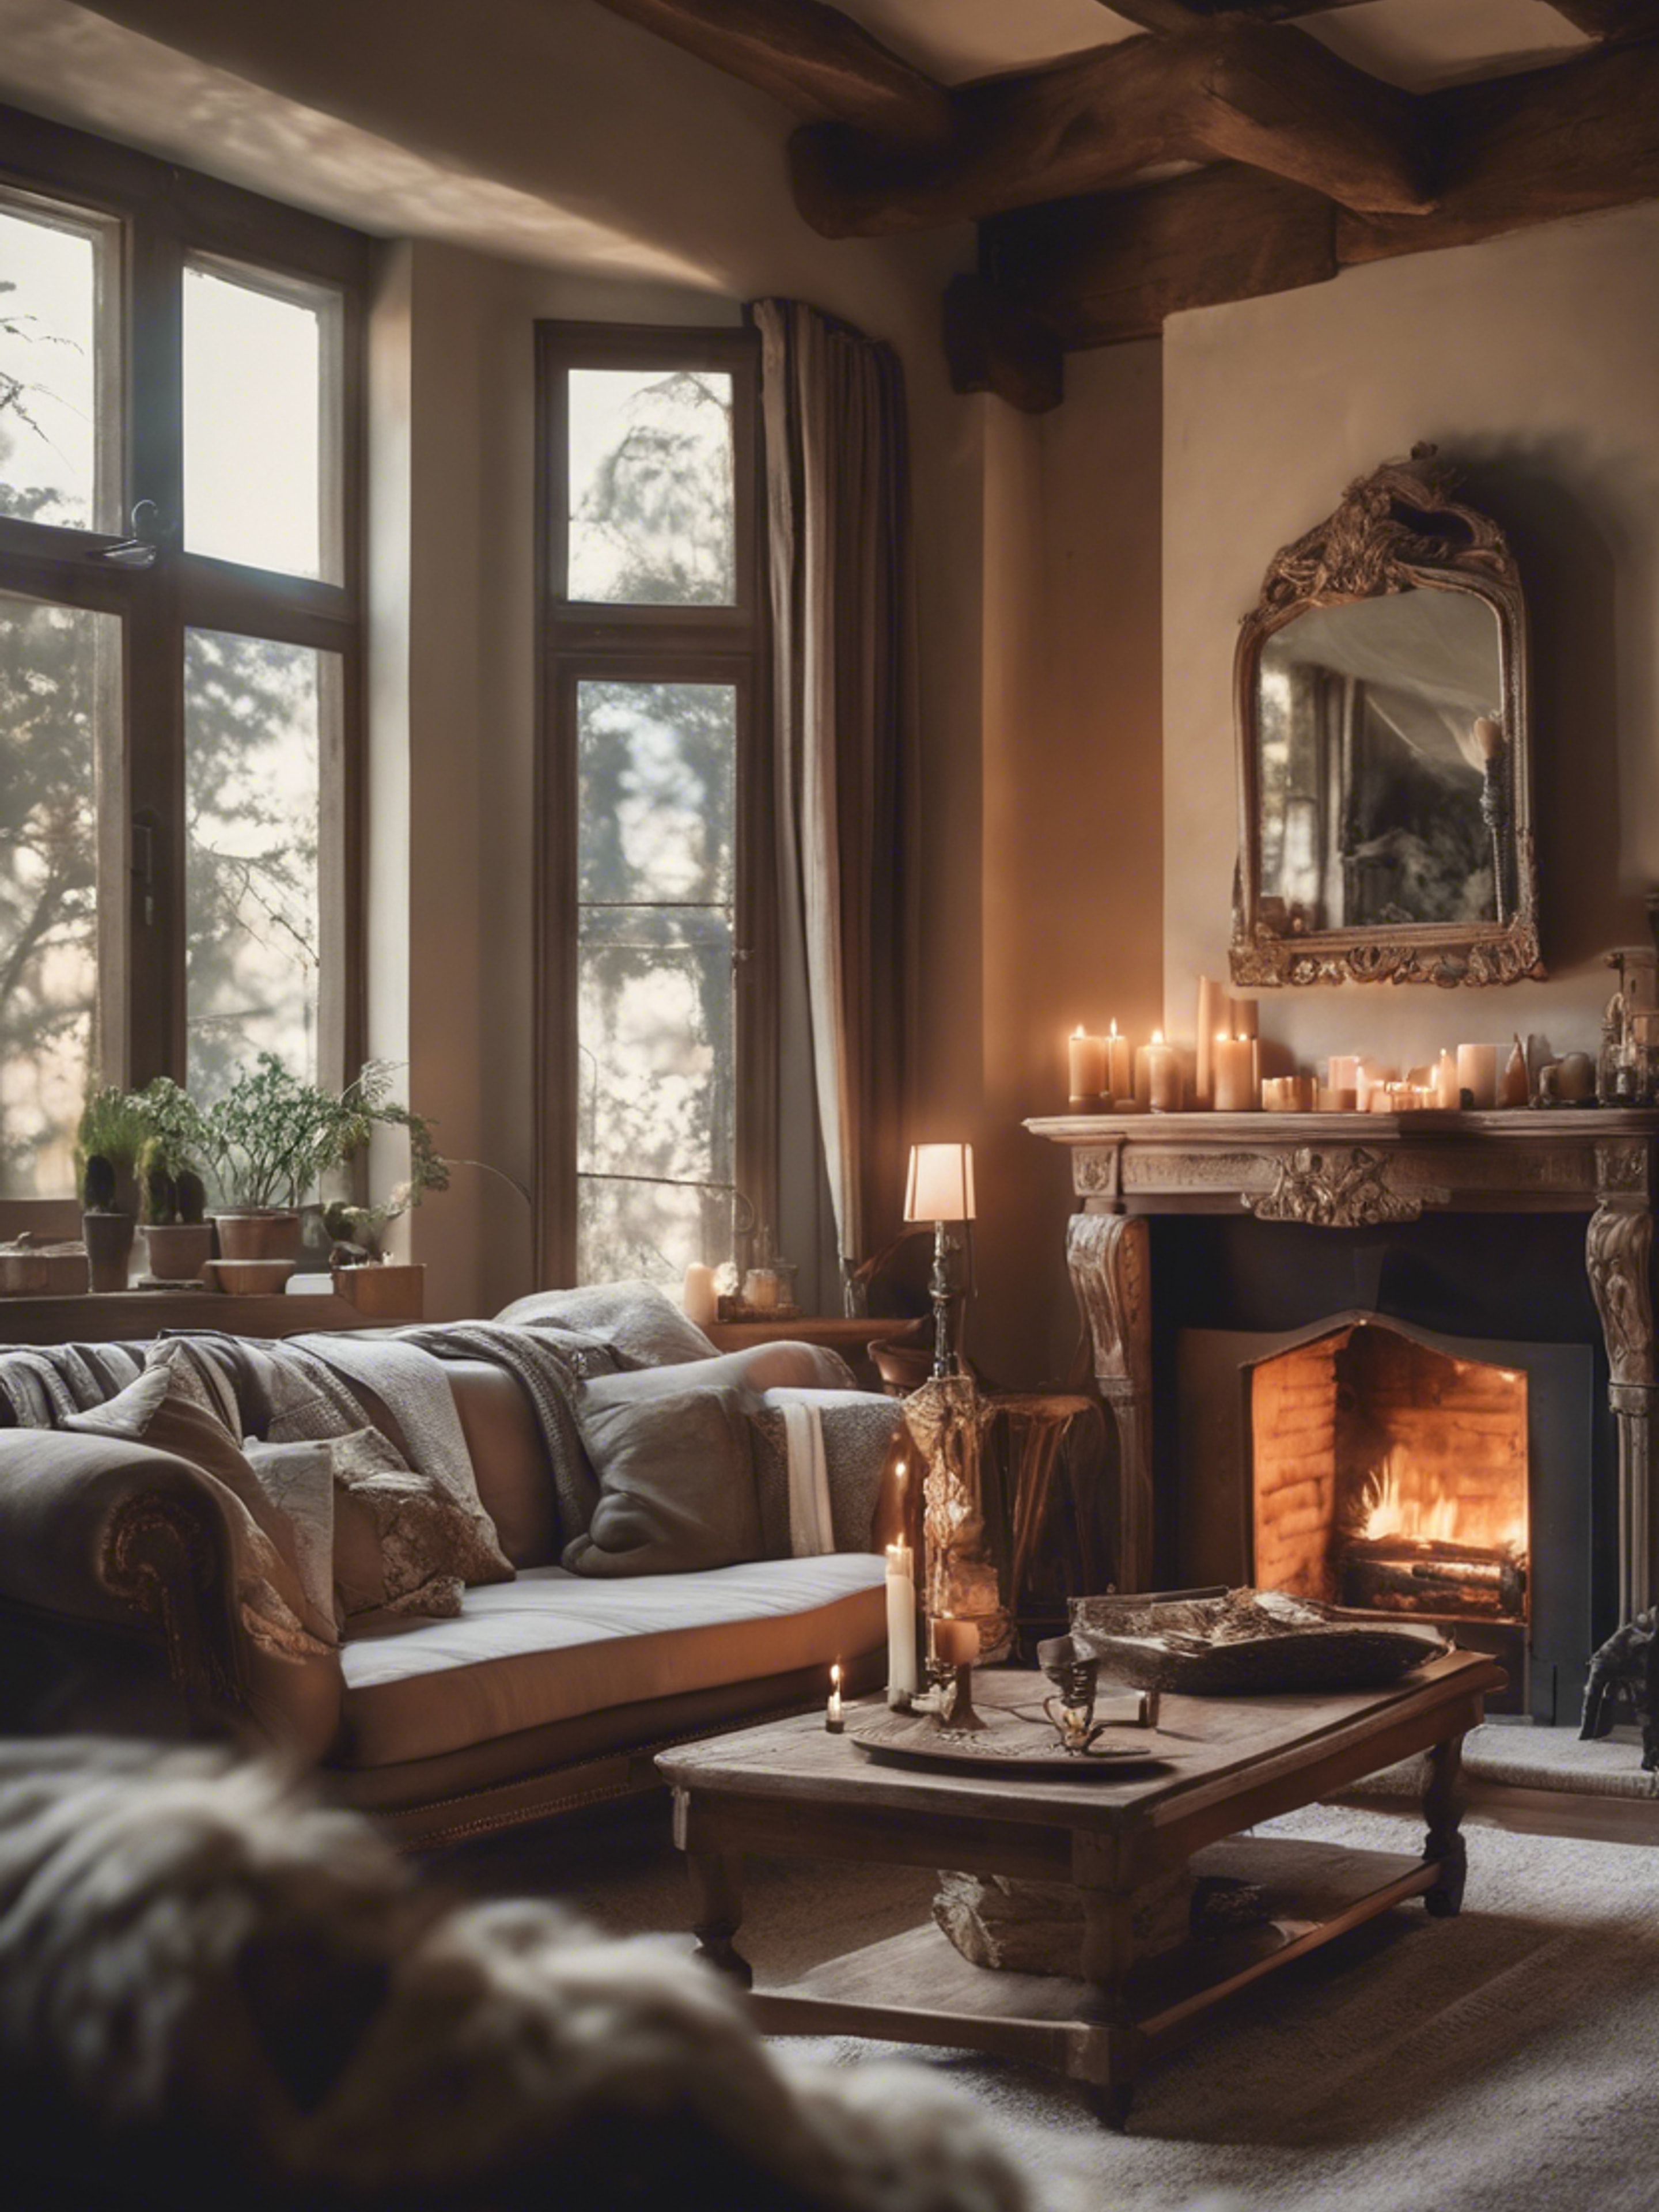 A French country style living room, cozy and comfortable with a roaring fireplace, antique furniture, and soft candlelight. Ფონი[b1f658778f85425ba676]